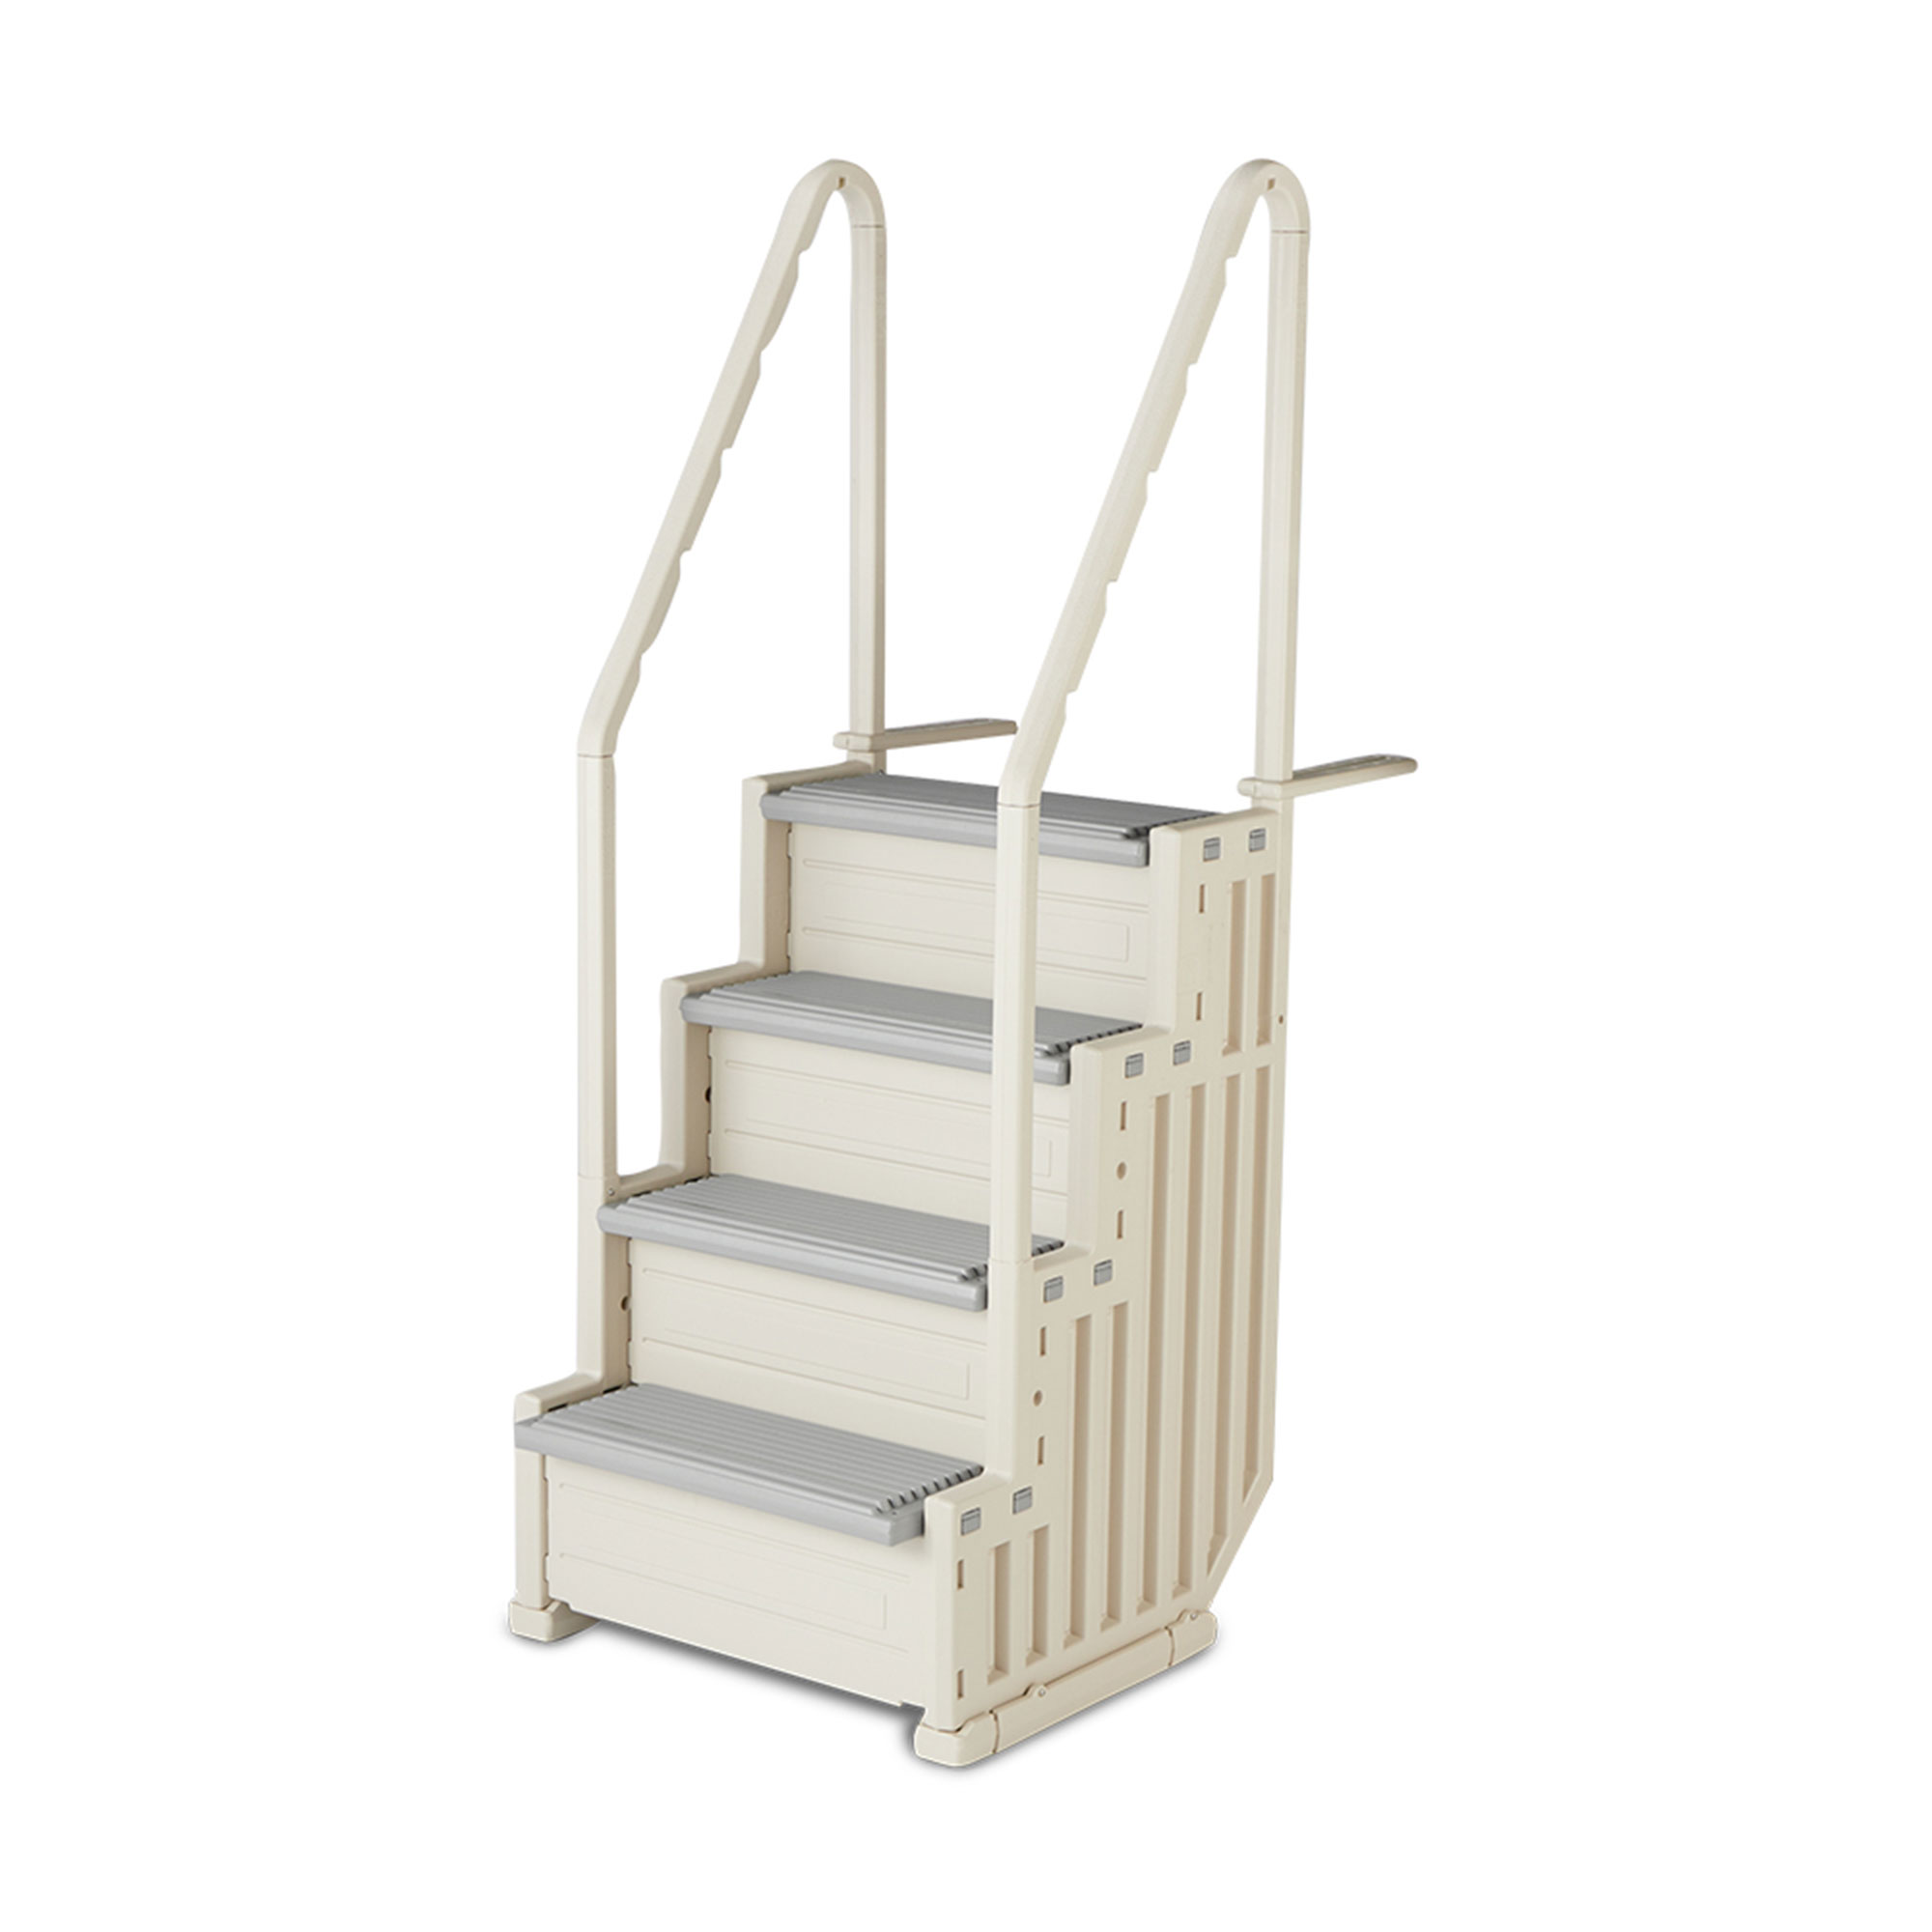 Confer Above Ground Swimming Pool Ladder 4 Stair Step Entry System, Gray - image 1 of 9